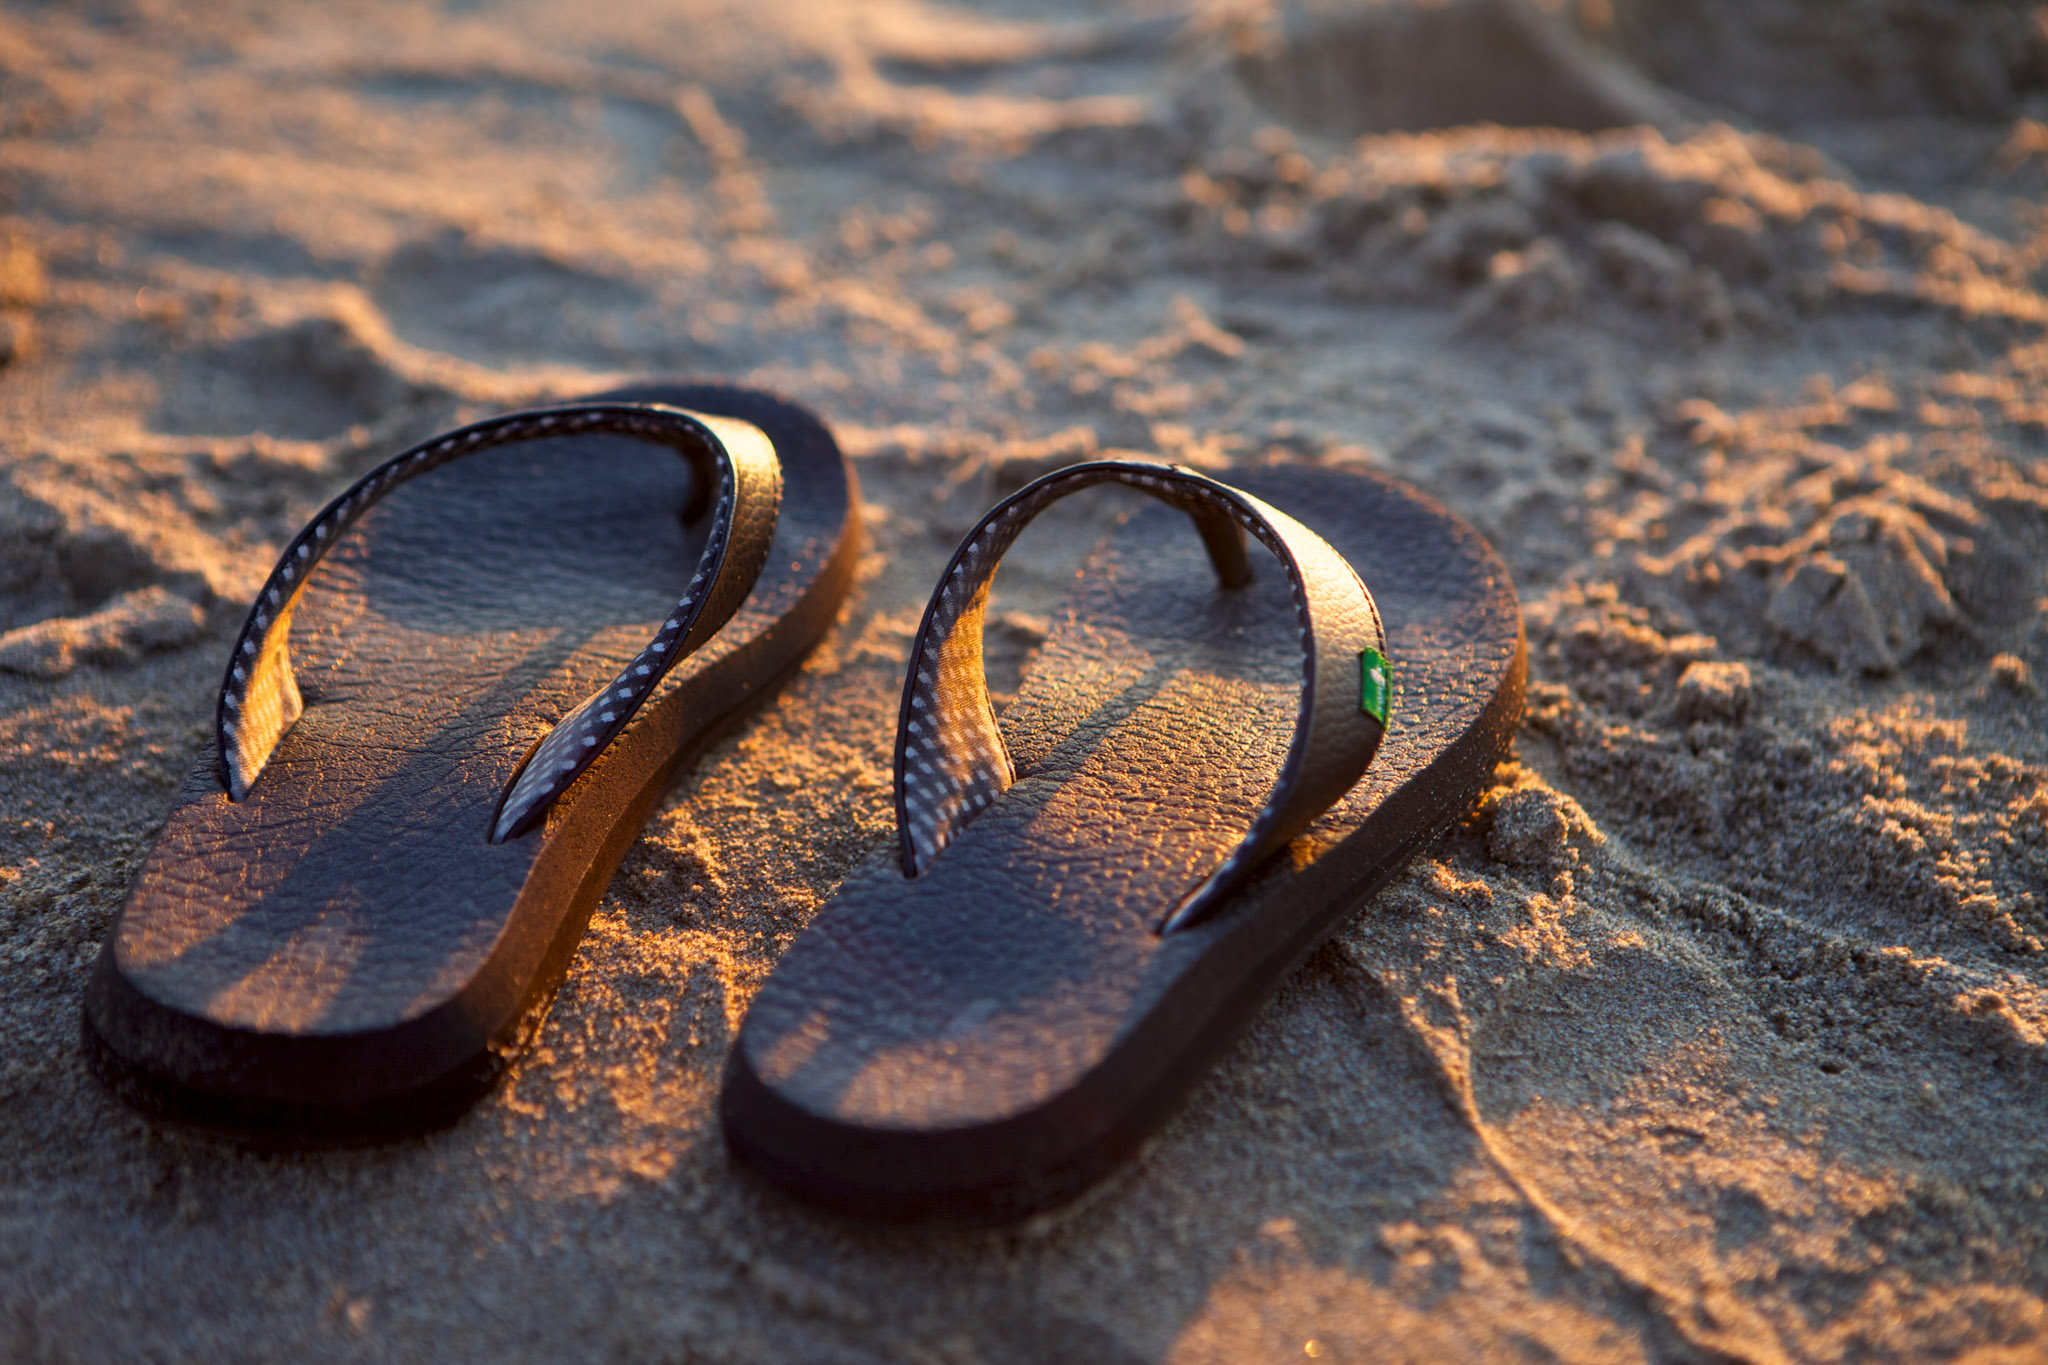 Sandals in the sand